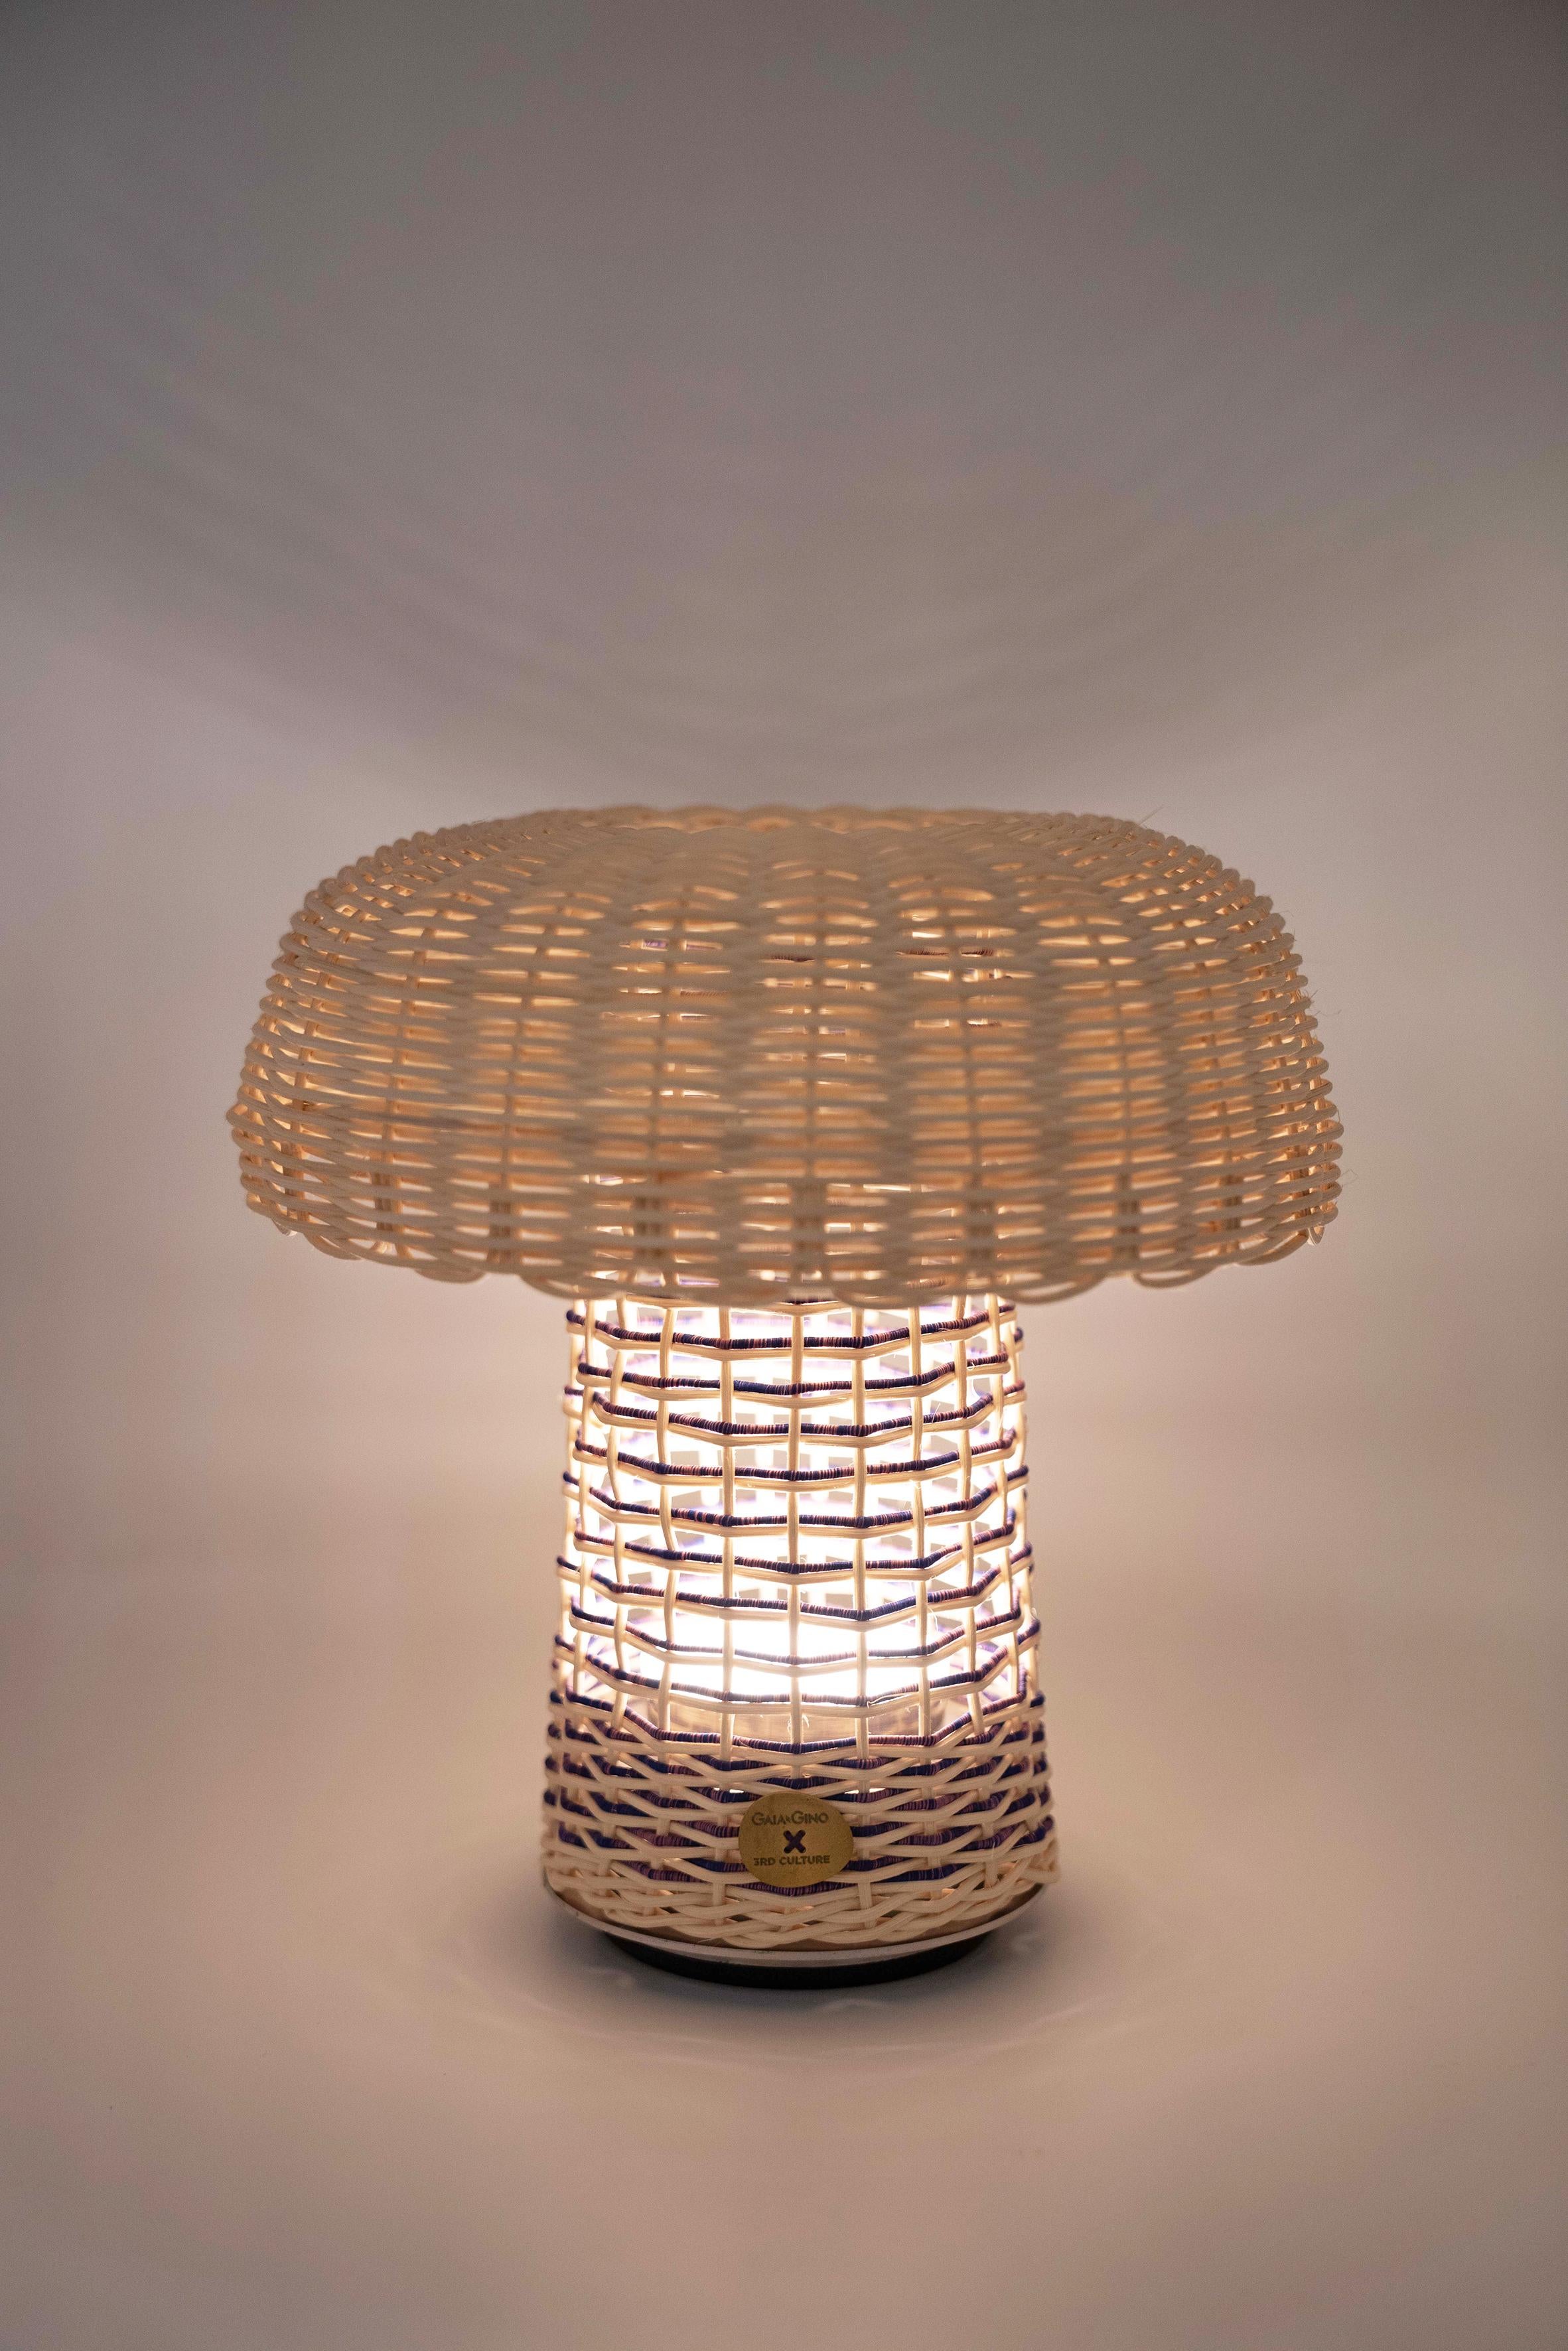 Fungi Cordless Portable Table Lamp is designed by Doganberk Demir  for GAIA&GINO x 3rd CULTURE and a part of the Wonderland Collection. 

The Fungi cordless table lamp innovatively twists traditional basket-making inside out creating a statement